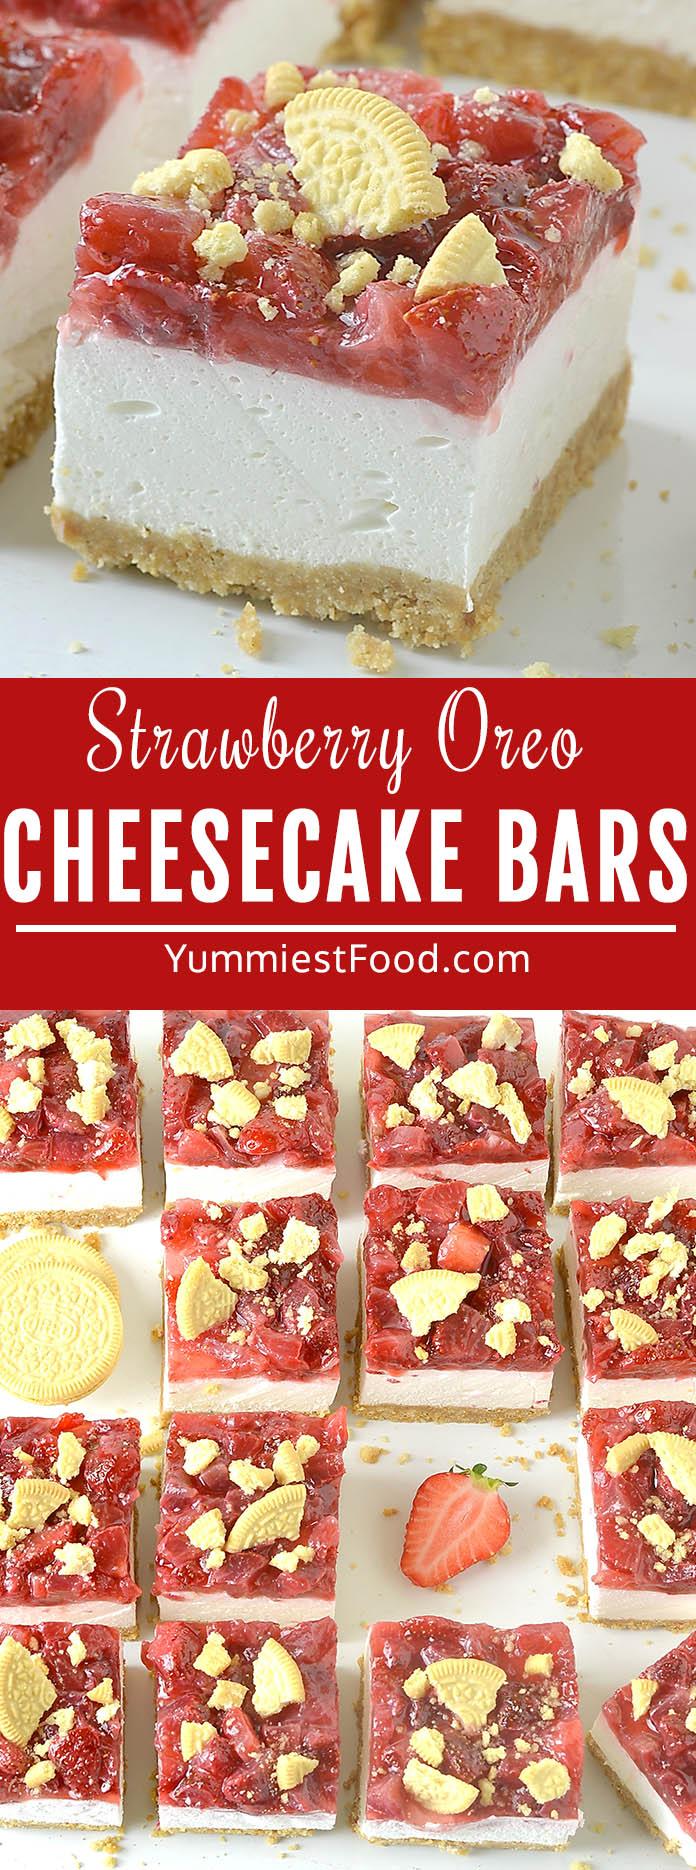 These NO BAKE Strawberry Oreo Cheesecake Bars have a Golden Oreo cookie crust, a creamy cheesecake filling and a homemade strawberry sauce on top. Easy, fun and delicious summer dessert!